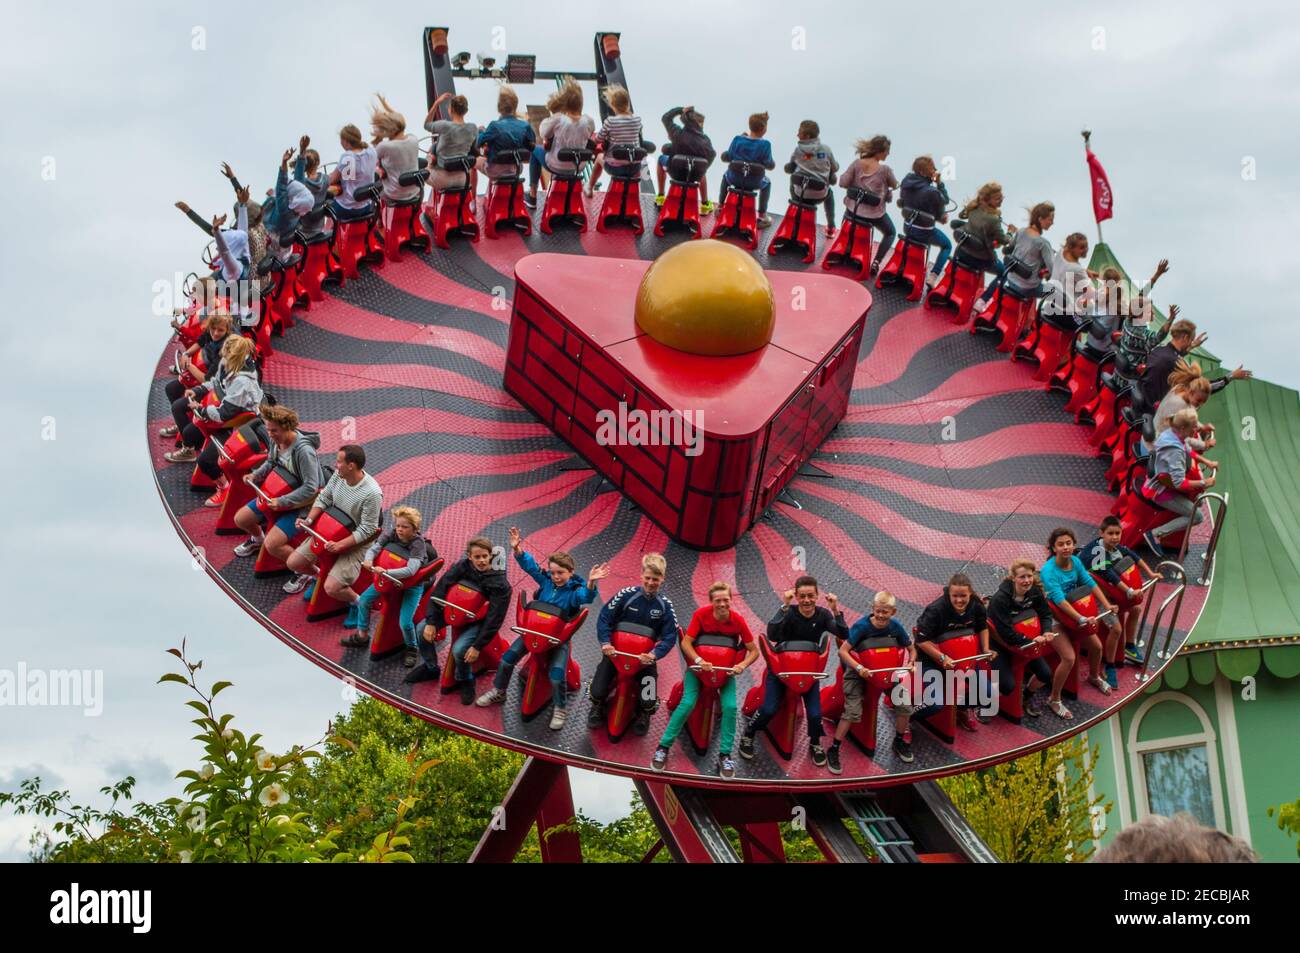 Gothenburg sweden - July 1. 2013: Young people having fun in  Hanghai which  is a swinging and spinning attraction in the Liseberg amusement park Stock Photo